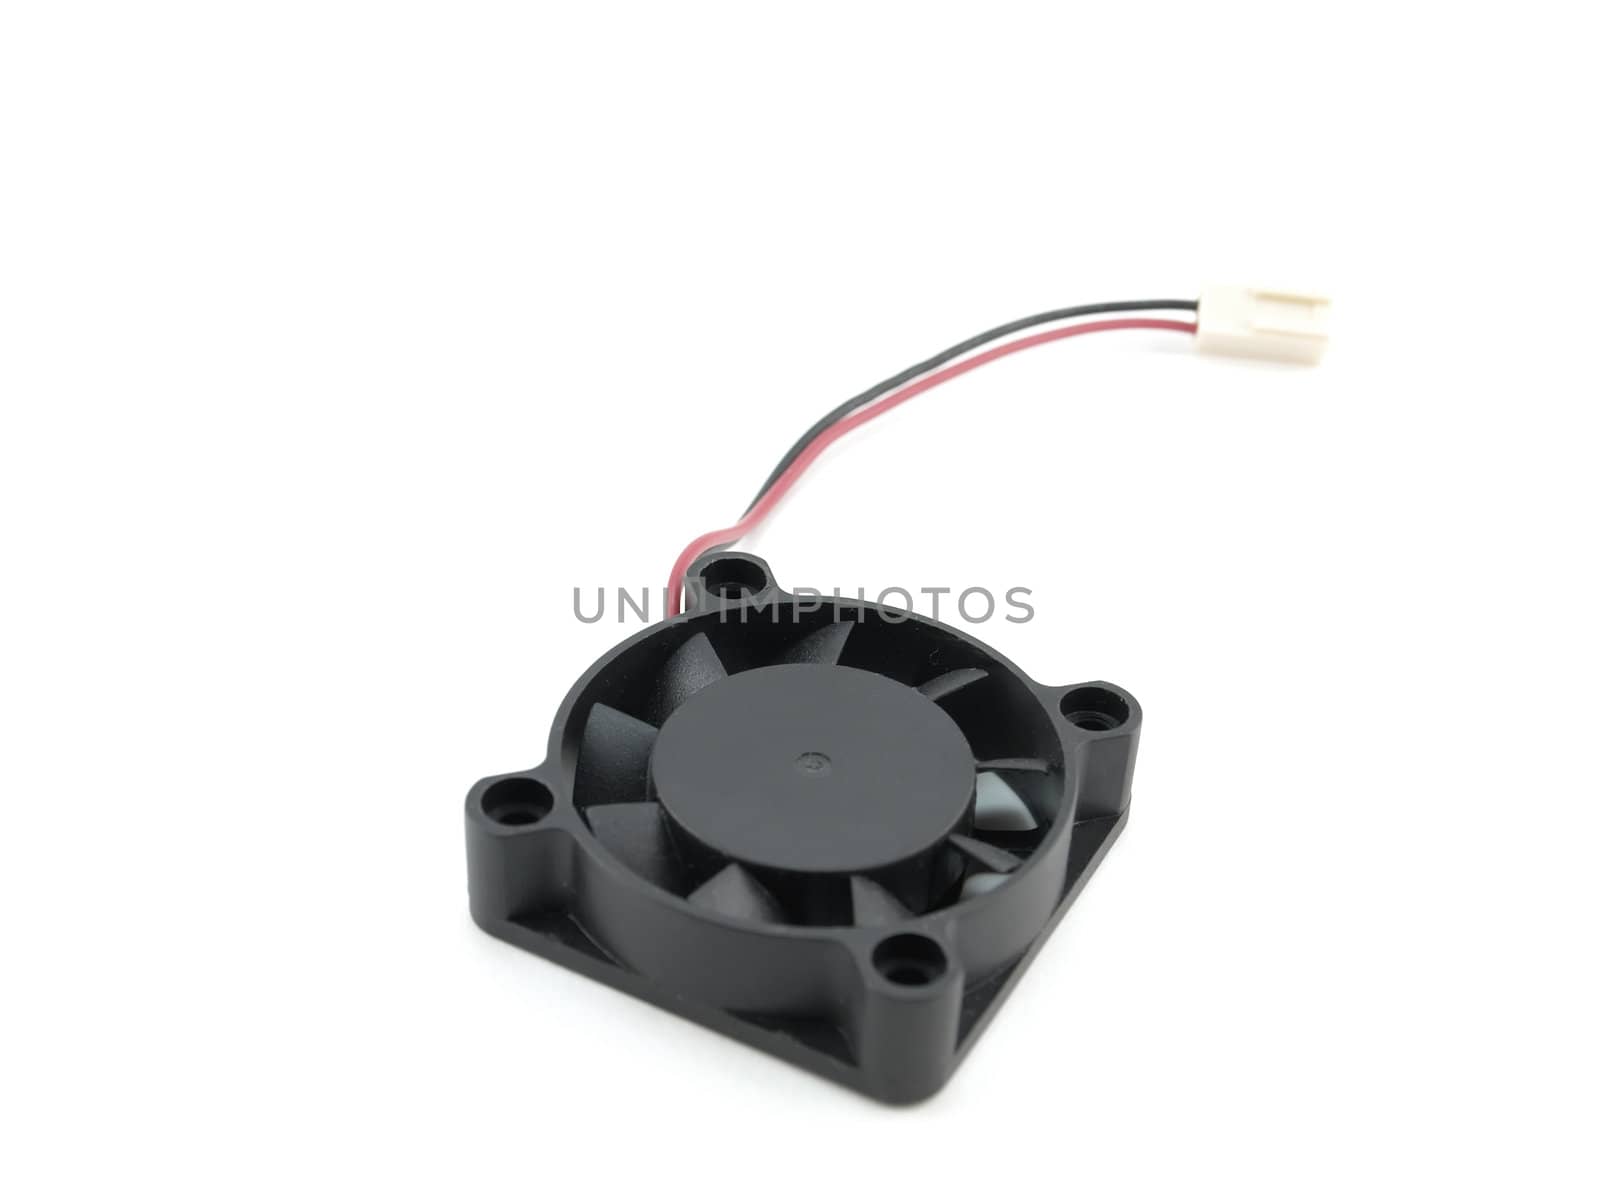 Fan for electronics over white